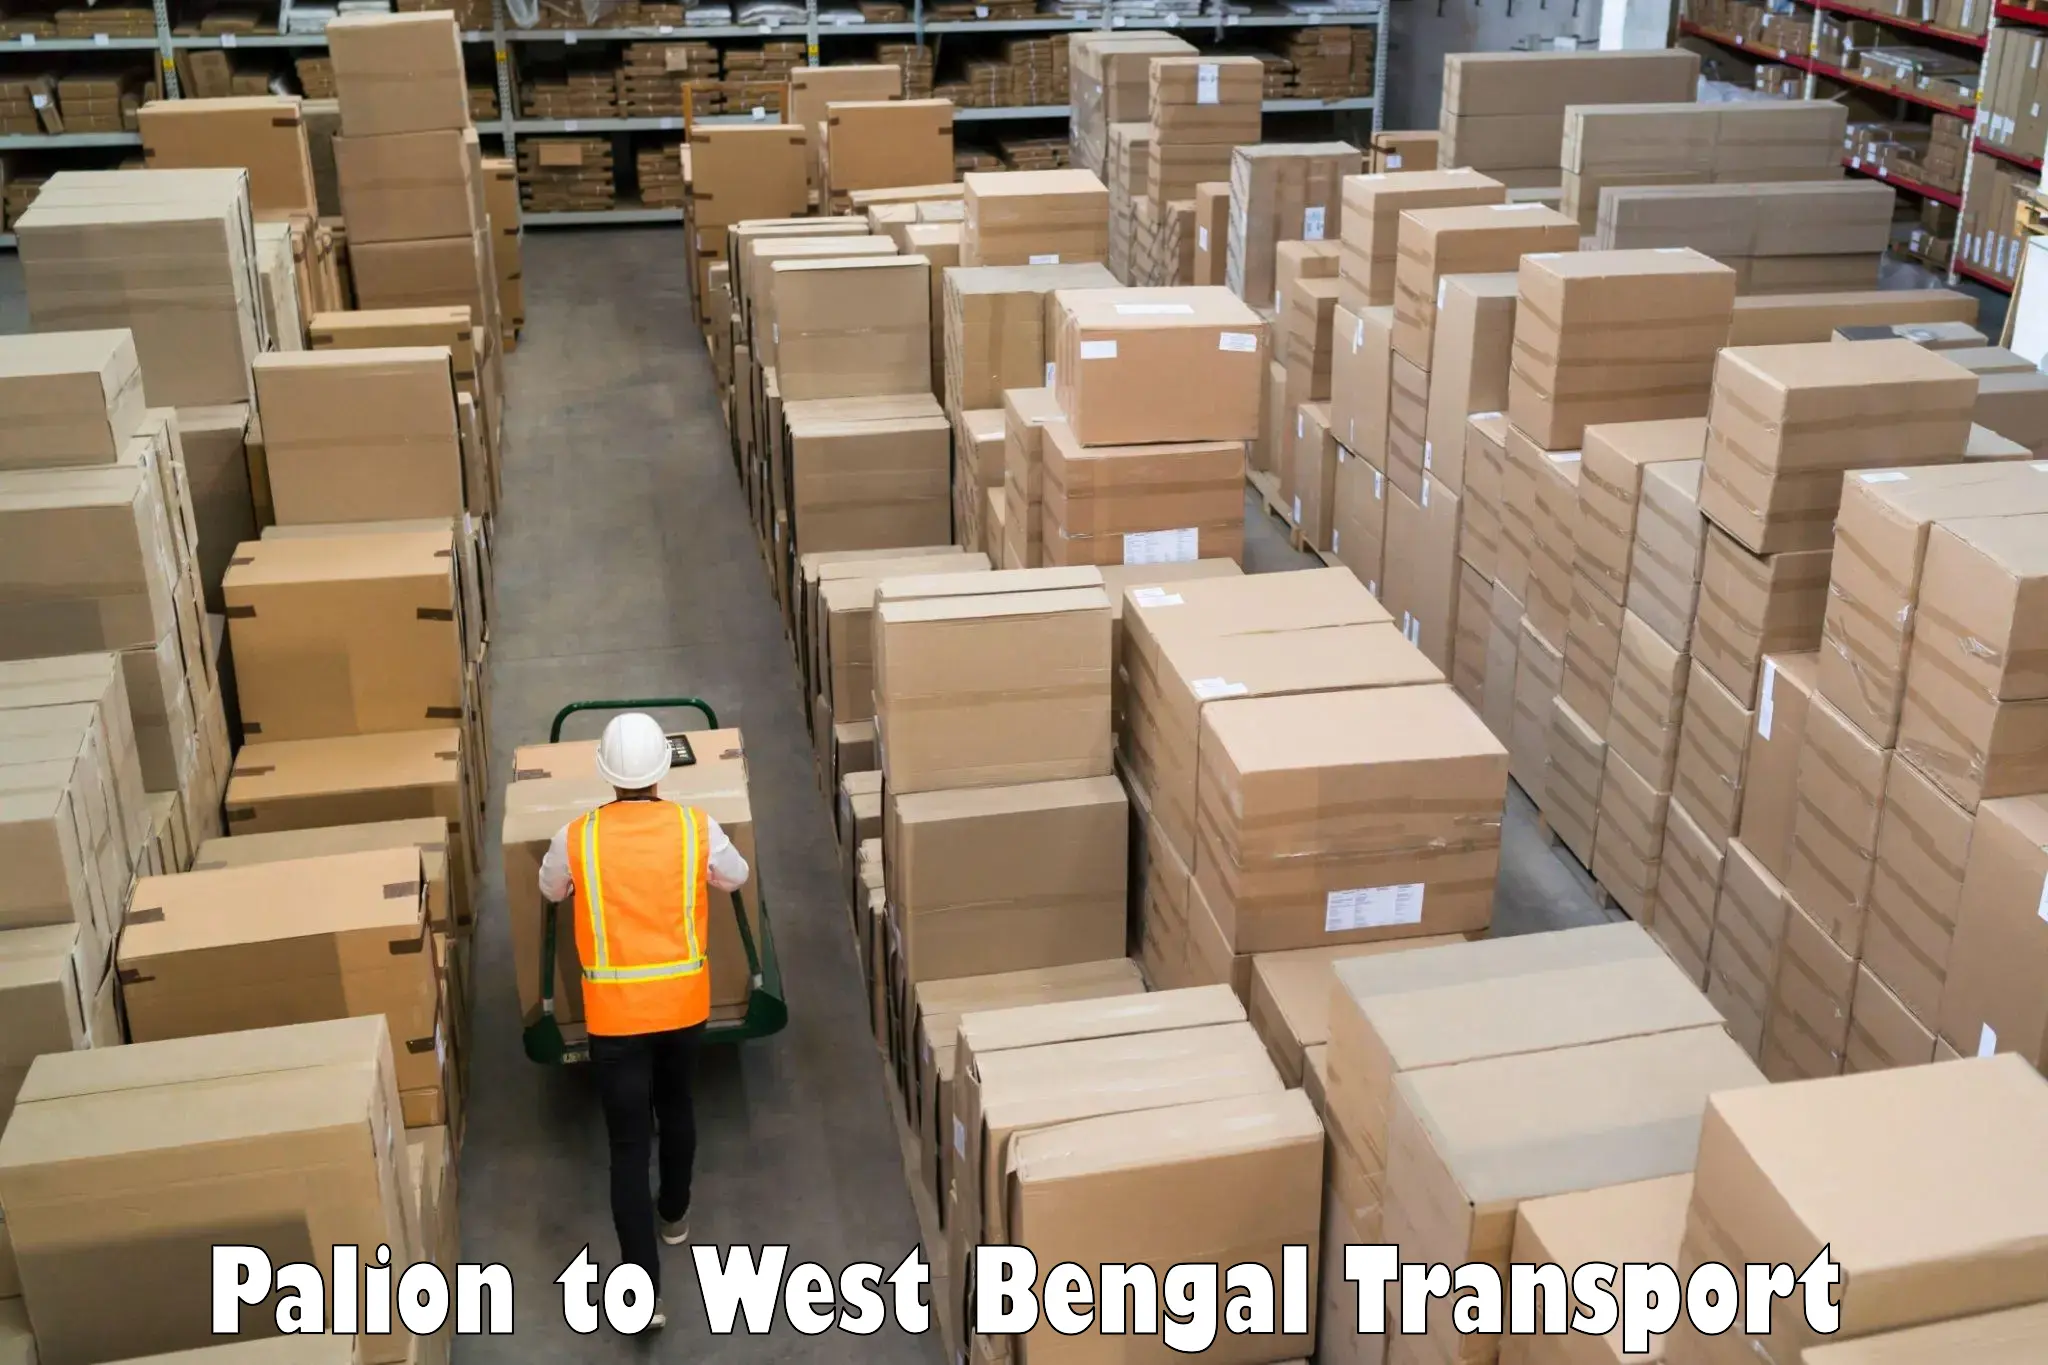 Bike transport service Palion to West Bengal